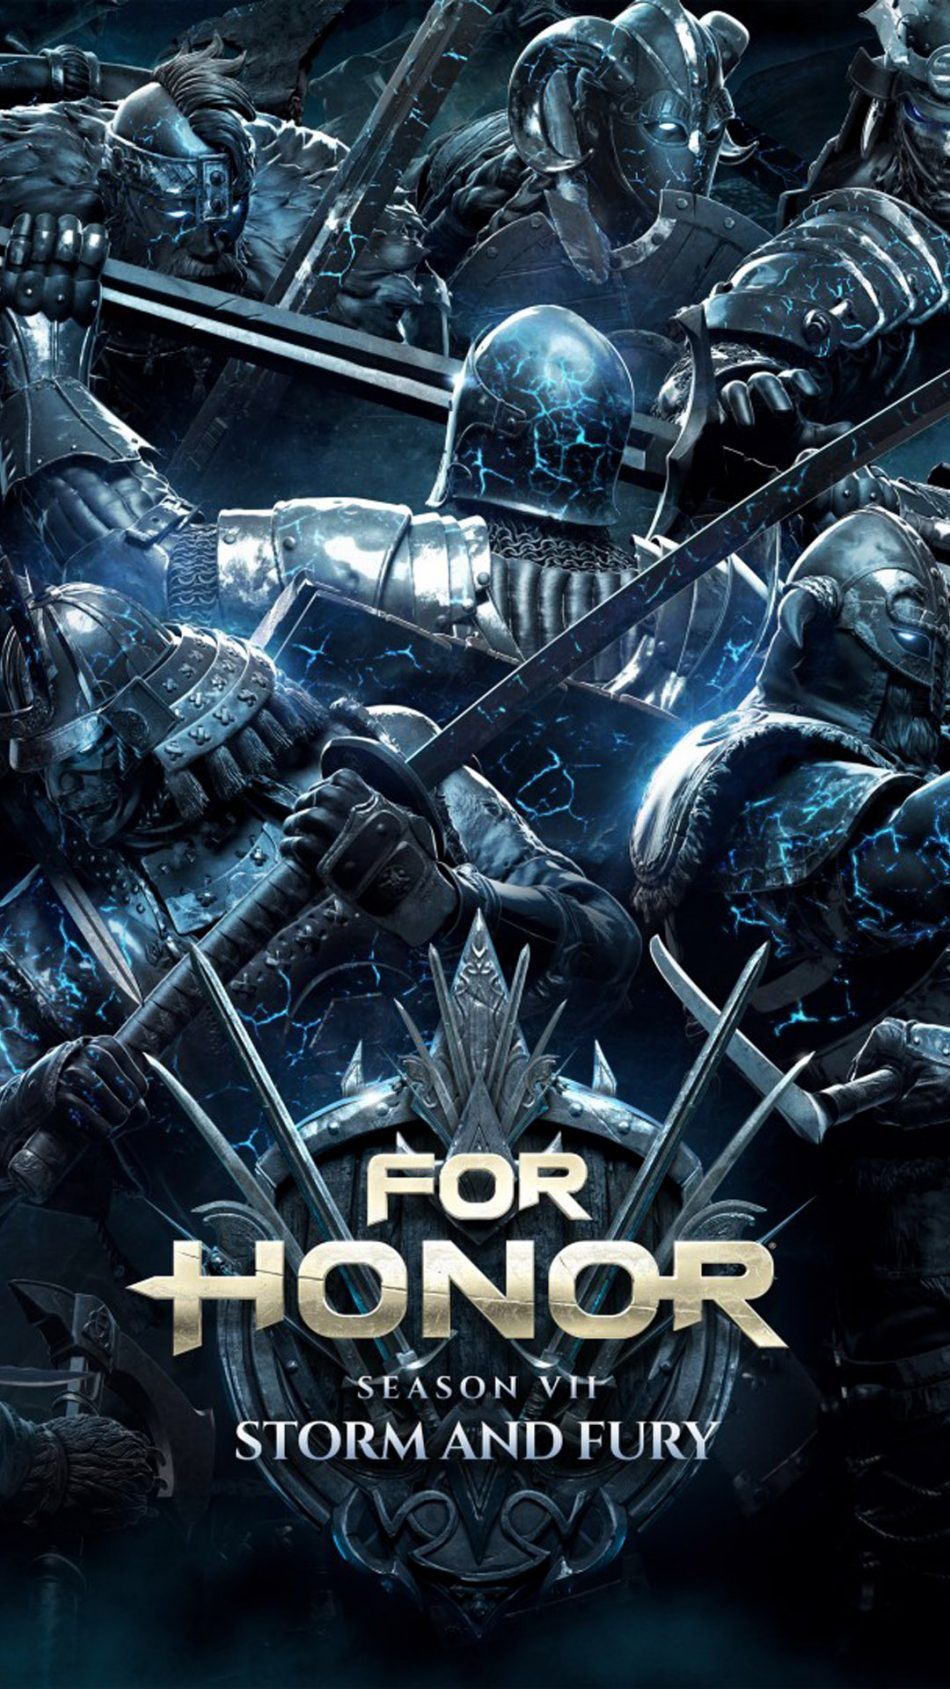 For Honor Season 7 Storm And Fury Free 4K Ultra HD Mobile Wallpaper